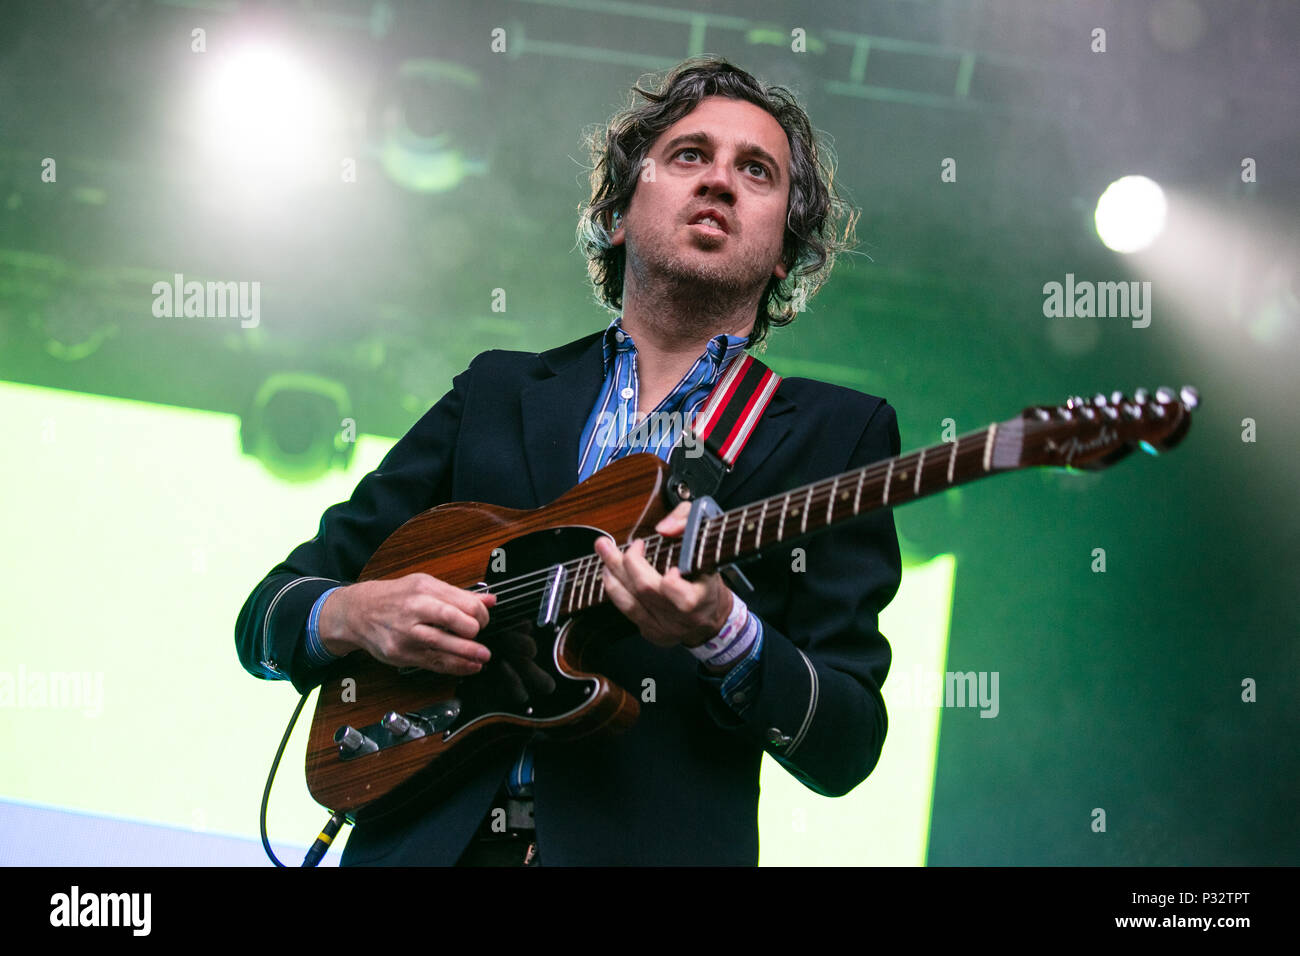 Norway, Oslo - June 16, 2018. The French indie pop band Phoenix performs a  live concert during the Norwegian music festival Piknik i Parken 2018 in  Oslo. Here guitarist Christian Mazzalai is